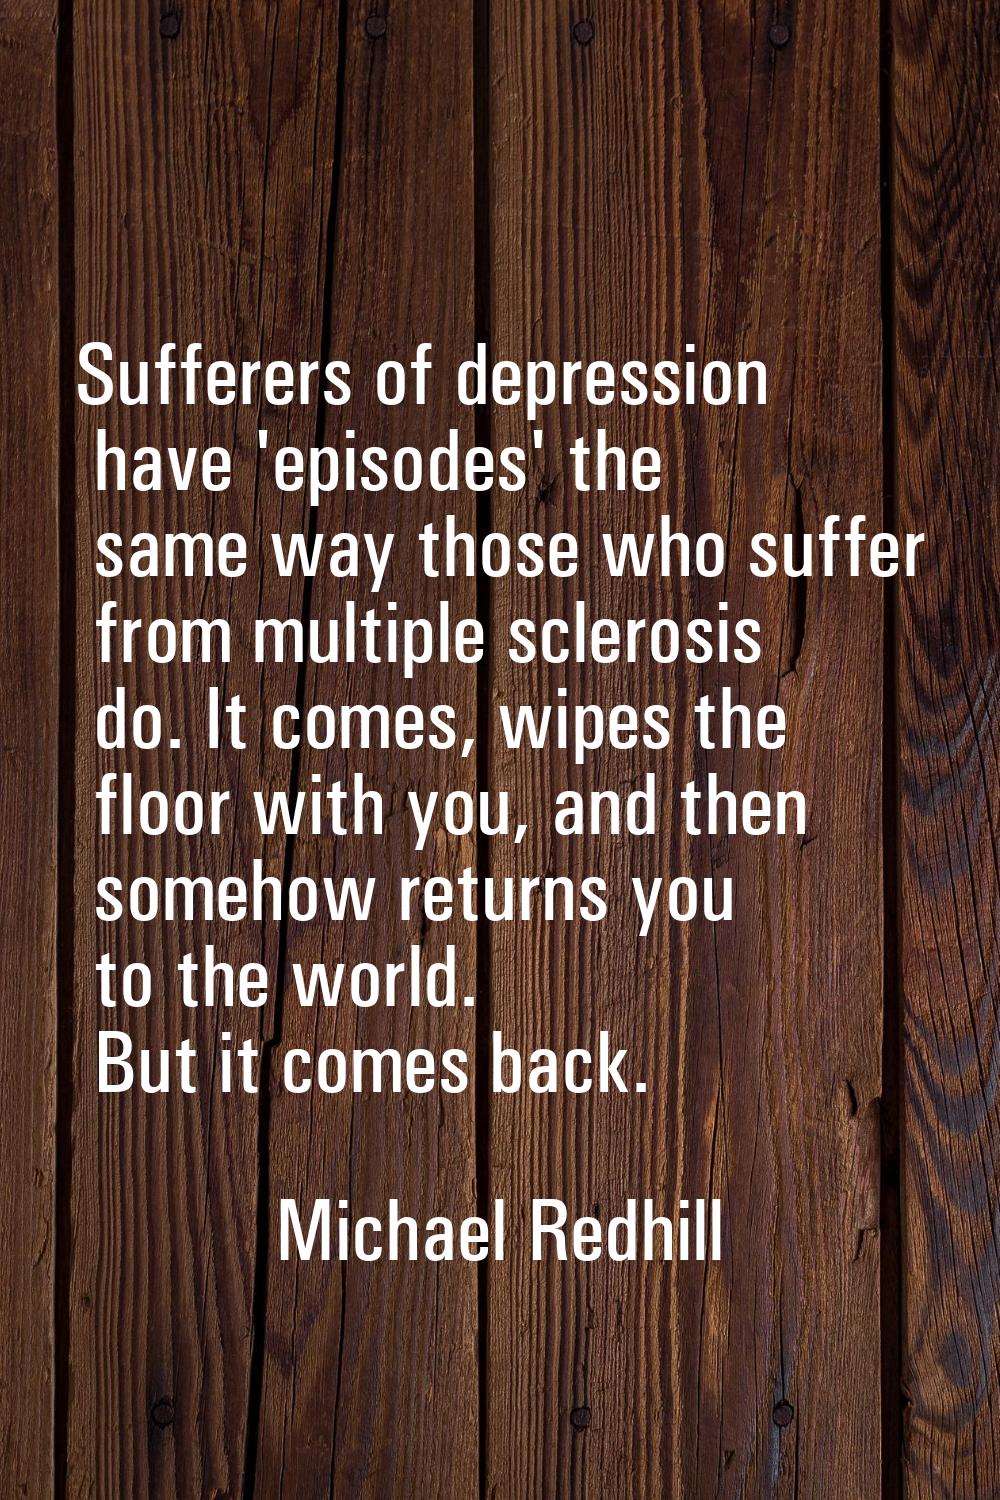 Sufferers of depression have 'episodes' the same way those who suffer from multiple sclerosis do. I